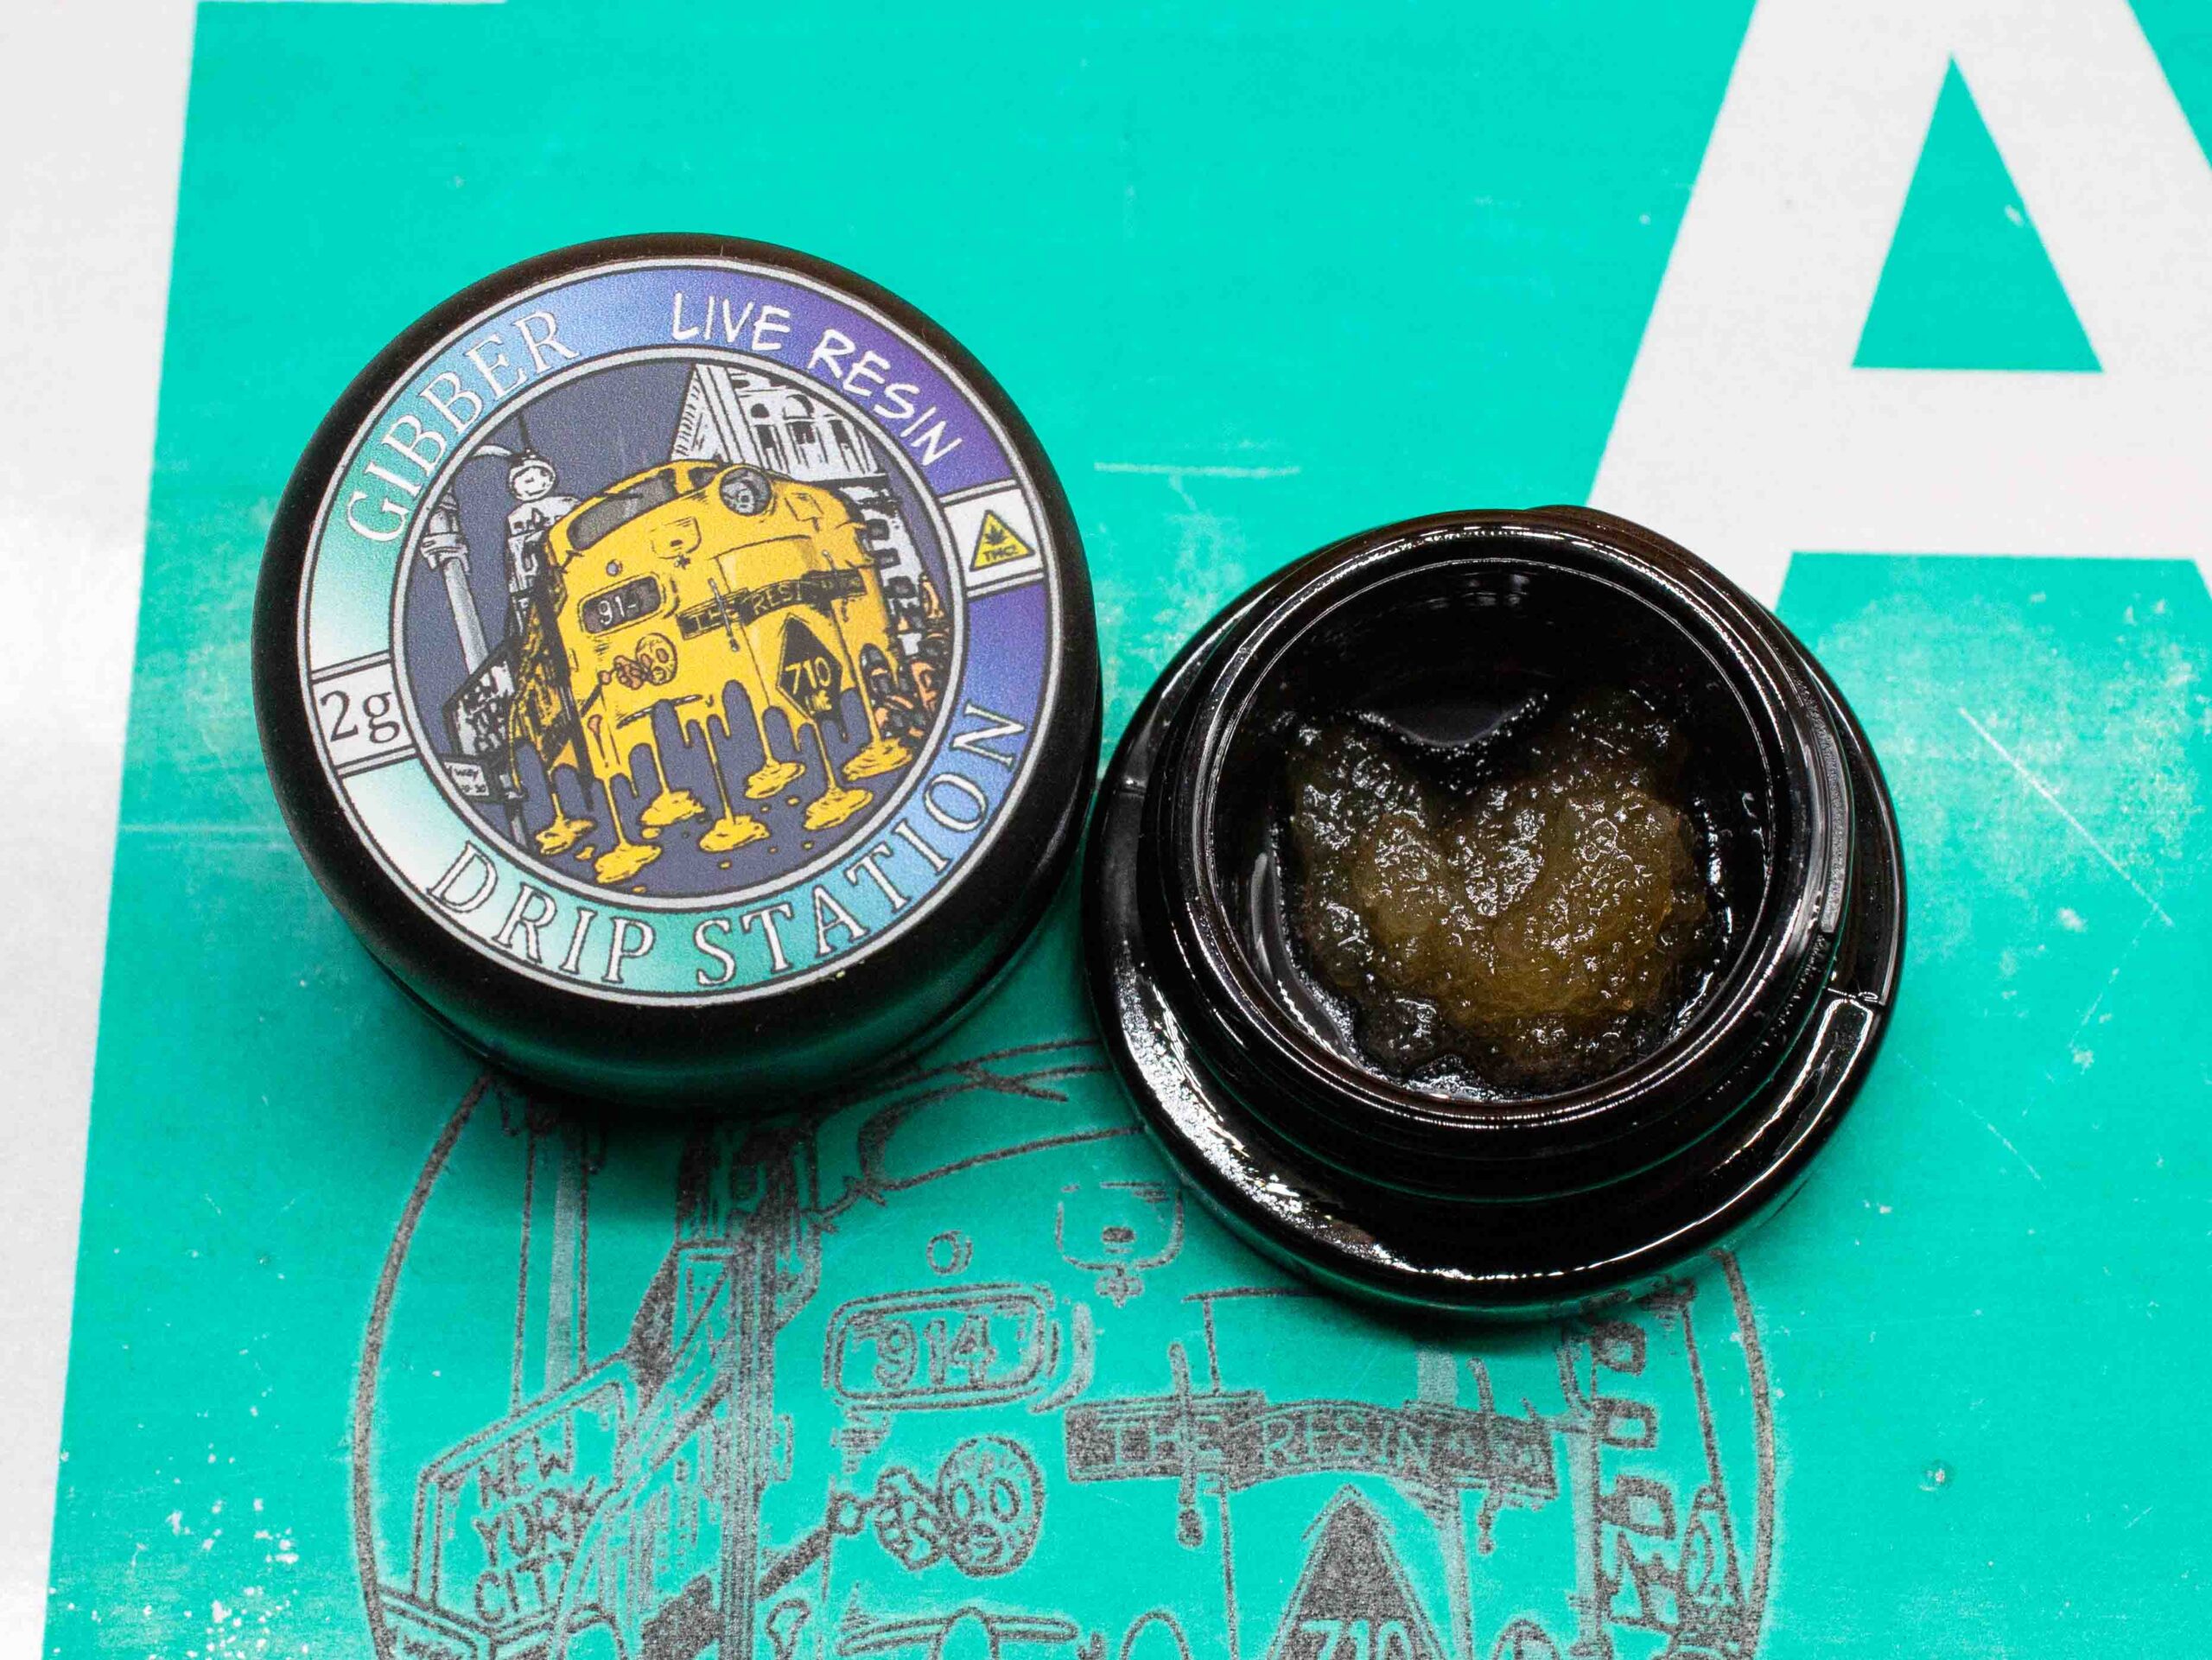 Drip Station 1g Live Resin NW